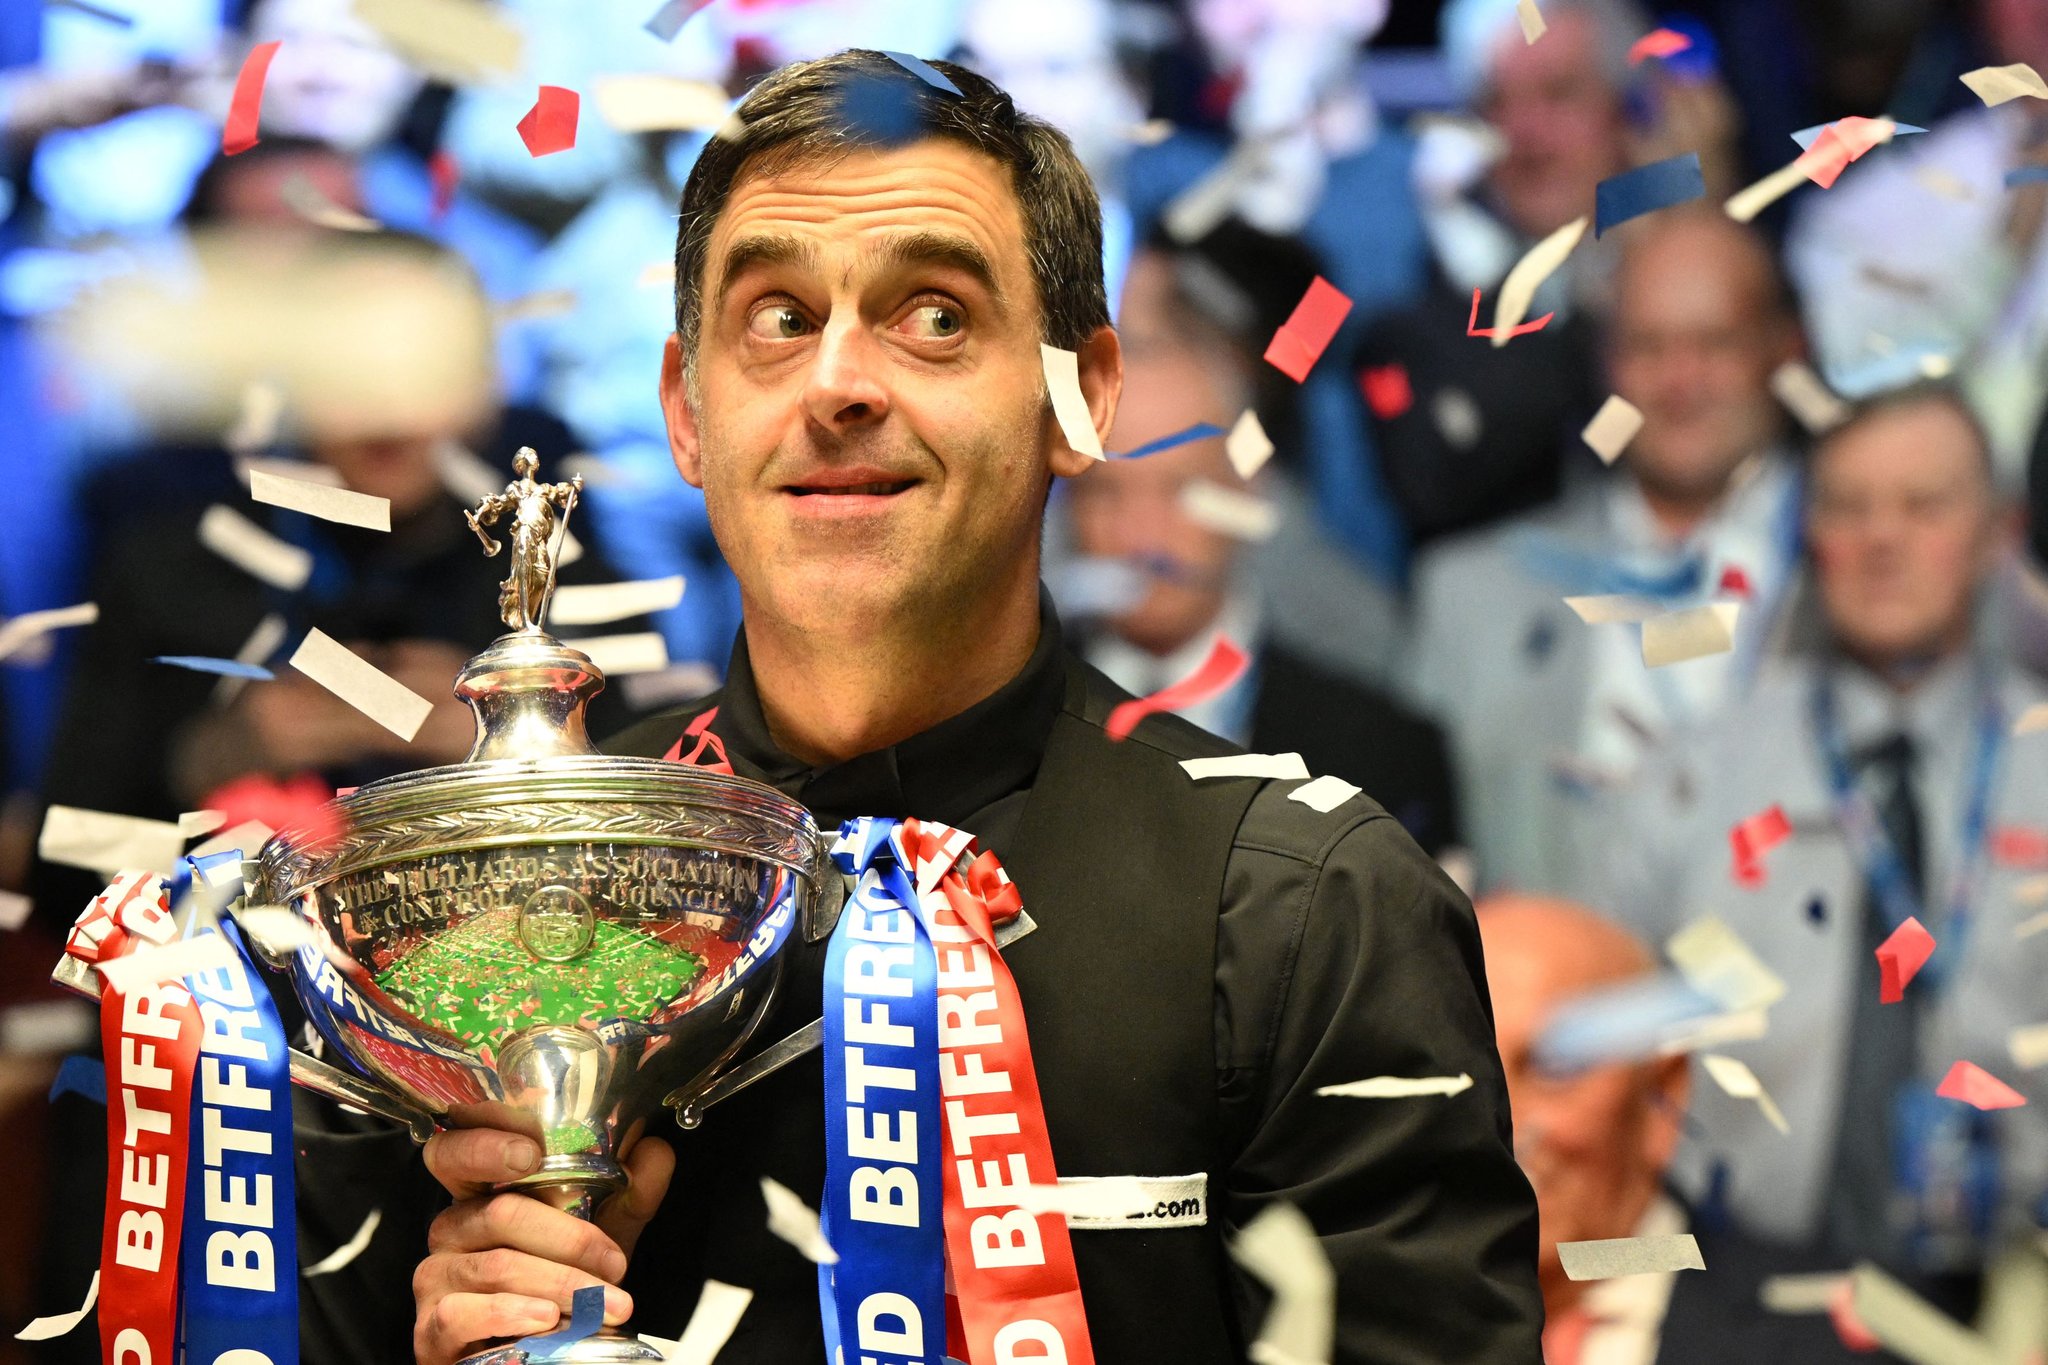 He can protest all he likes, Ronnie O'Sullivan is a snooker superstar